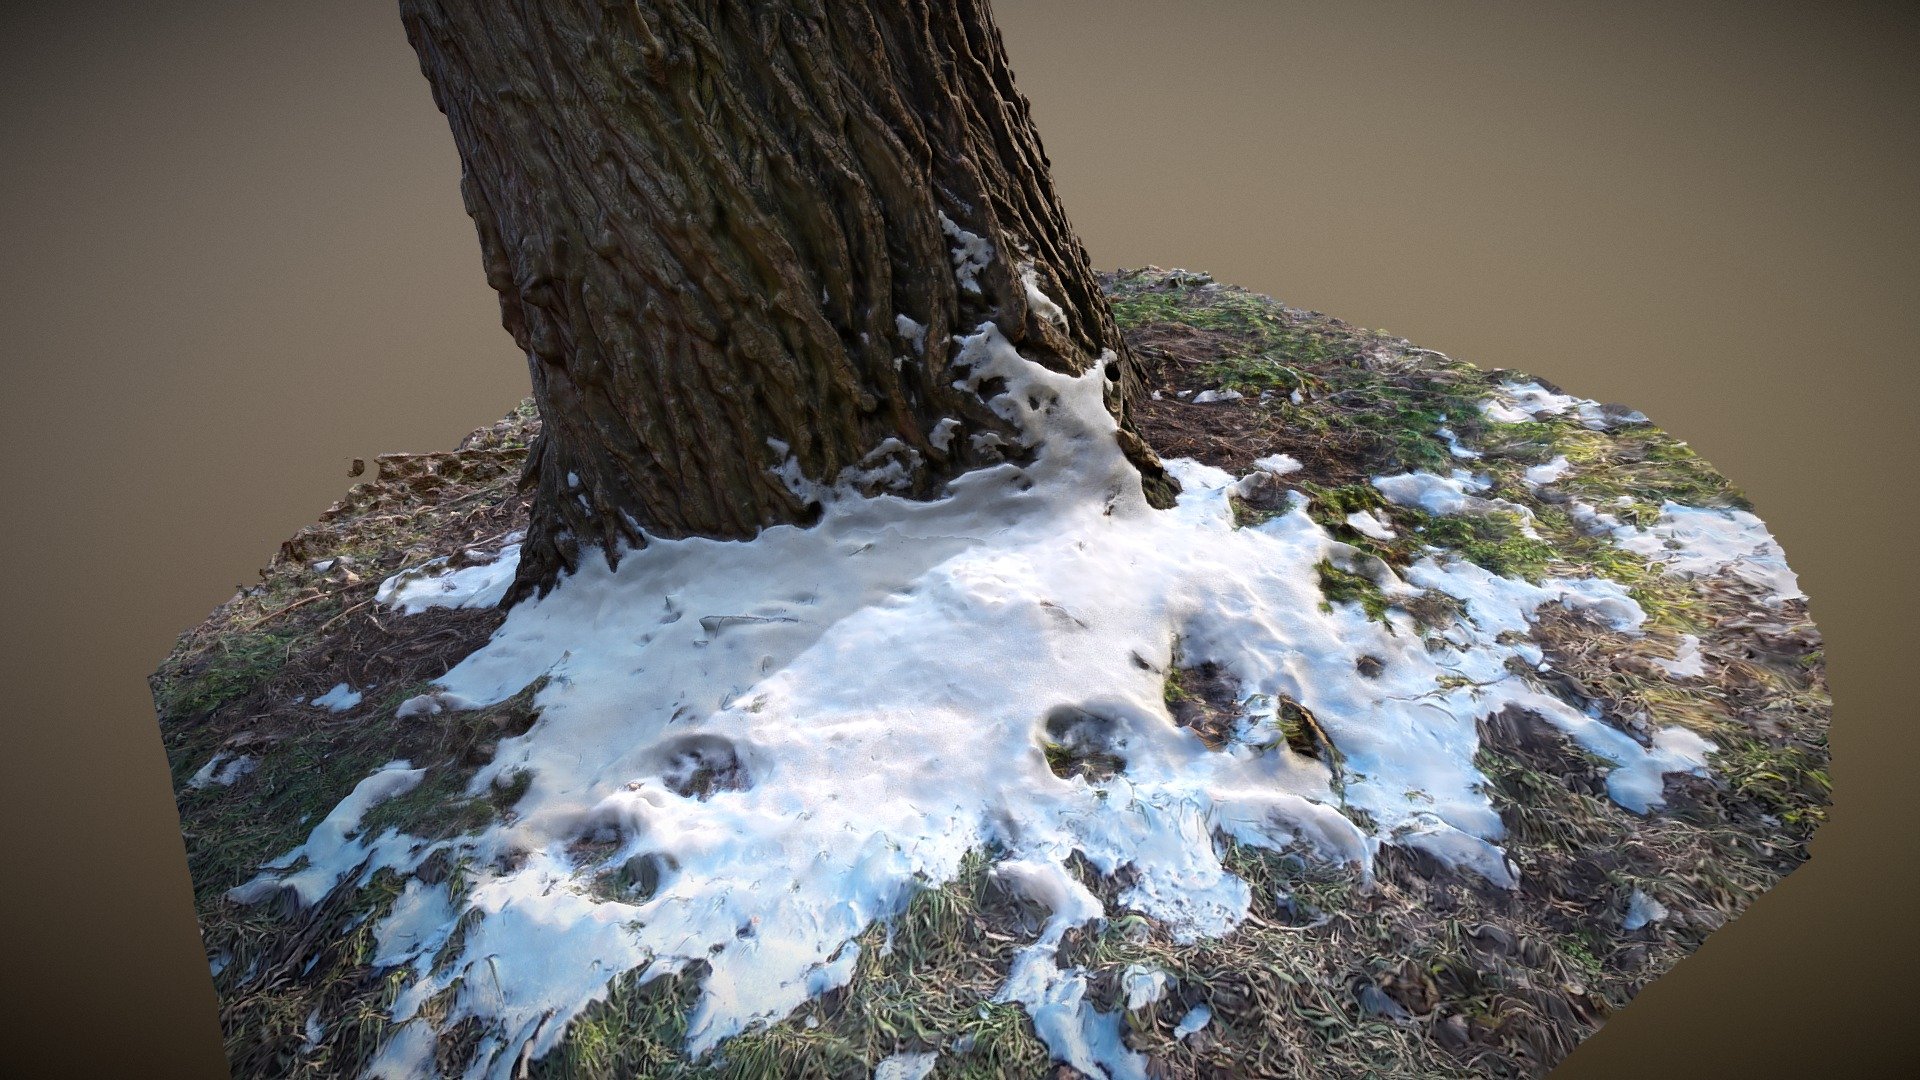 Photogrammetry from 73 Images

Camera: Samsung A5 (13 Mpx)

Image Quality 0.77-0.85

 - [3D-Scan] "Tree Stub" - Download Free 3D model by insomnia333 3d model